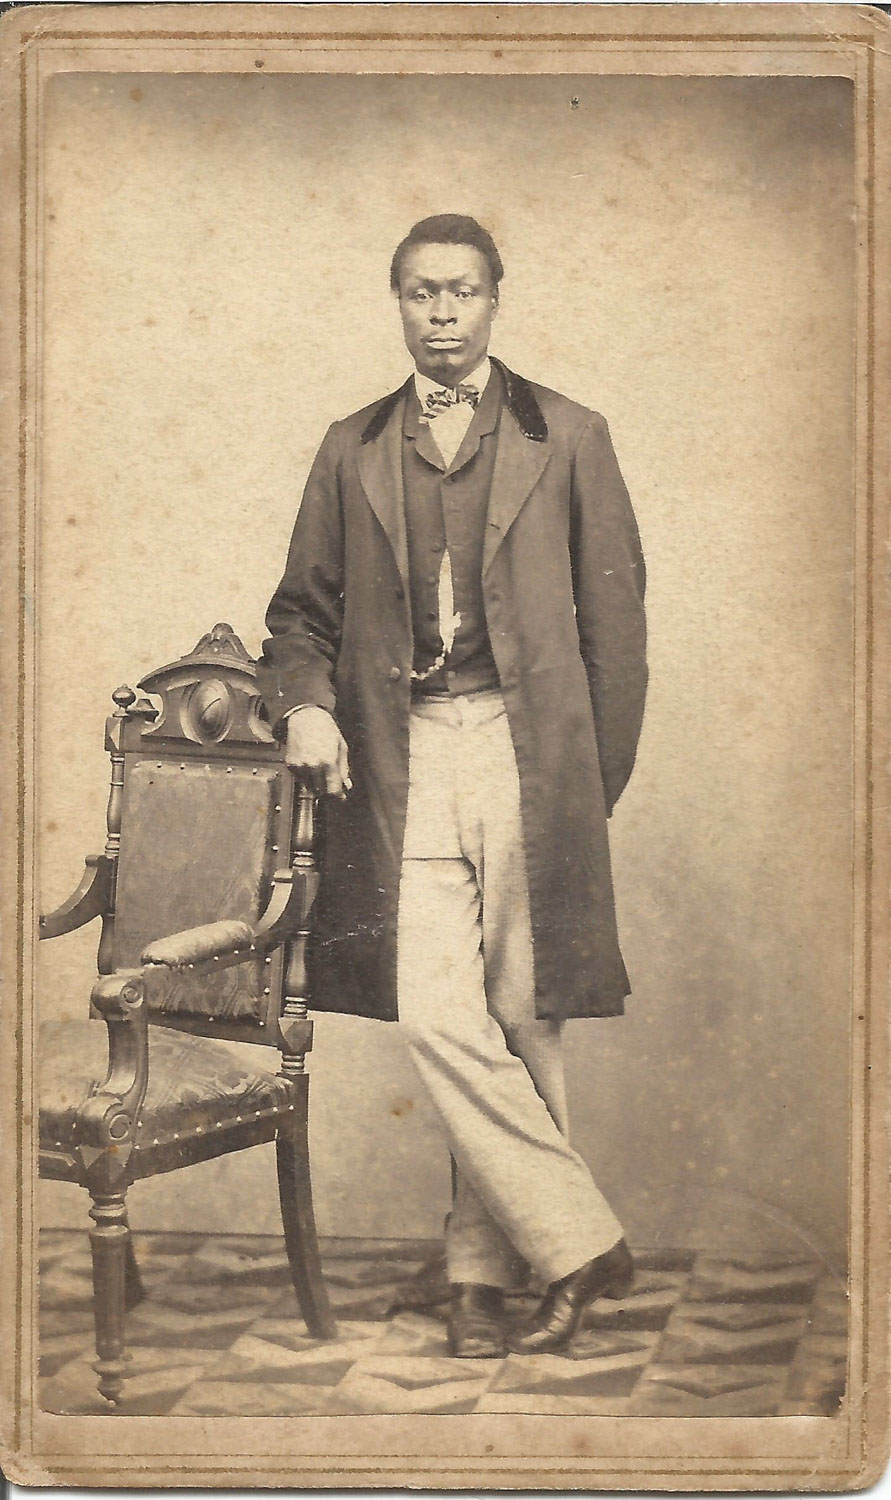 Black Man Standing with Feet Crossed and White Slacks